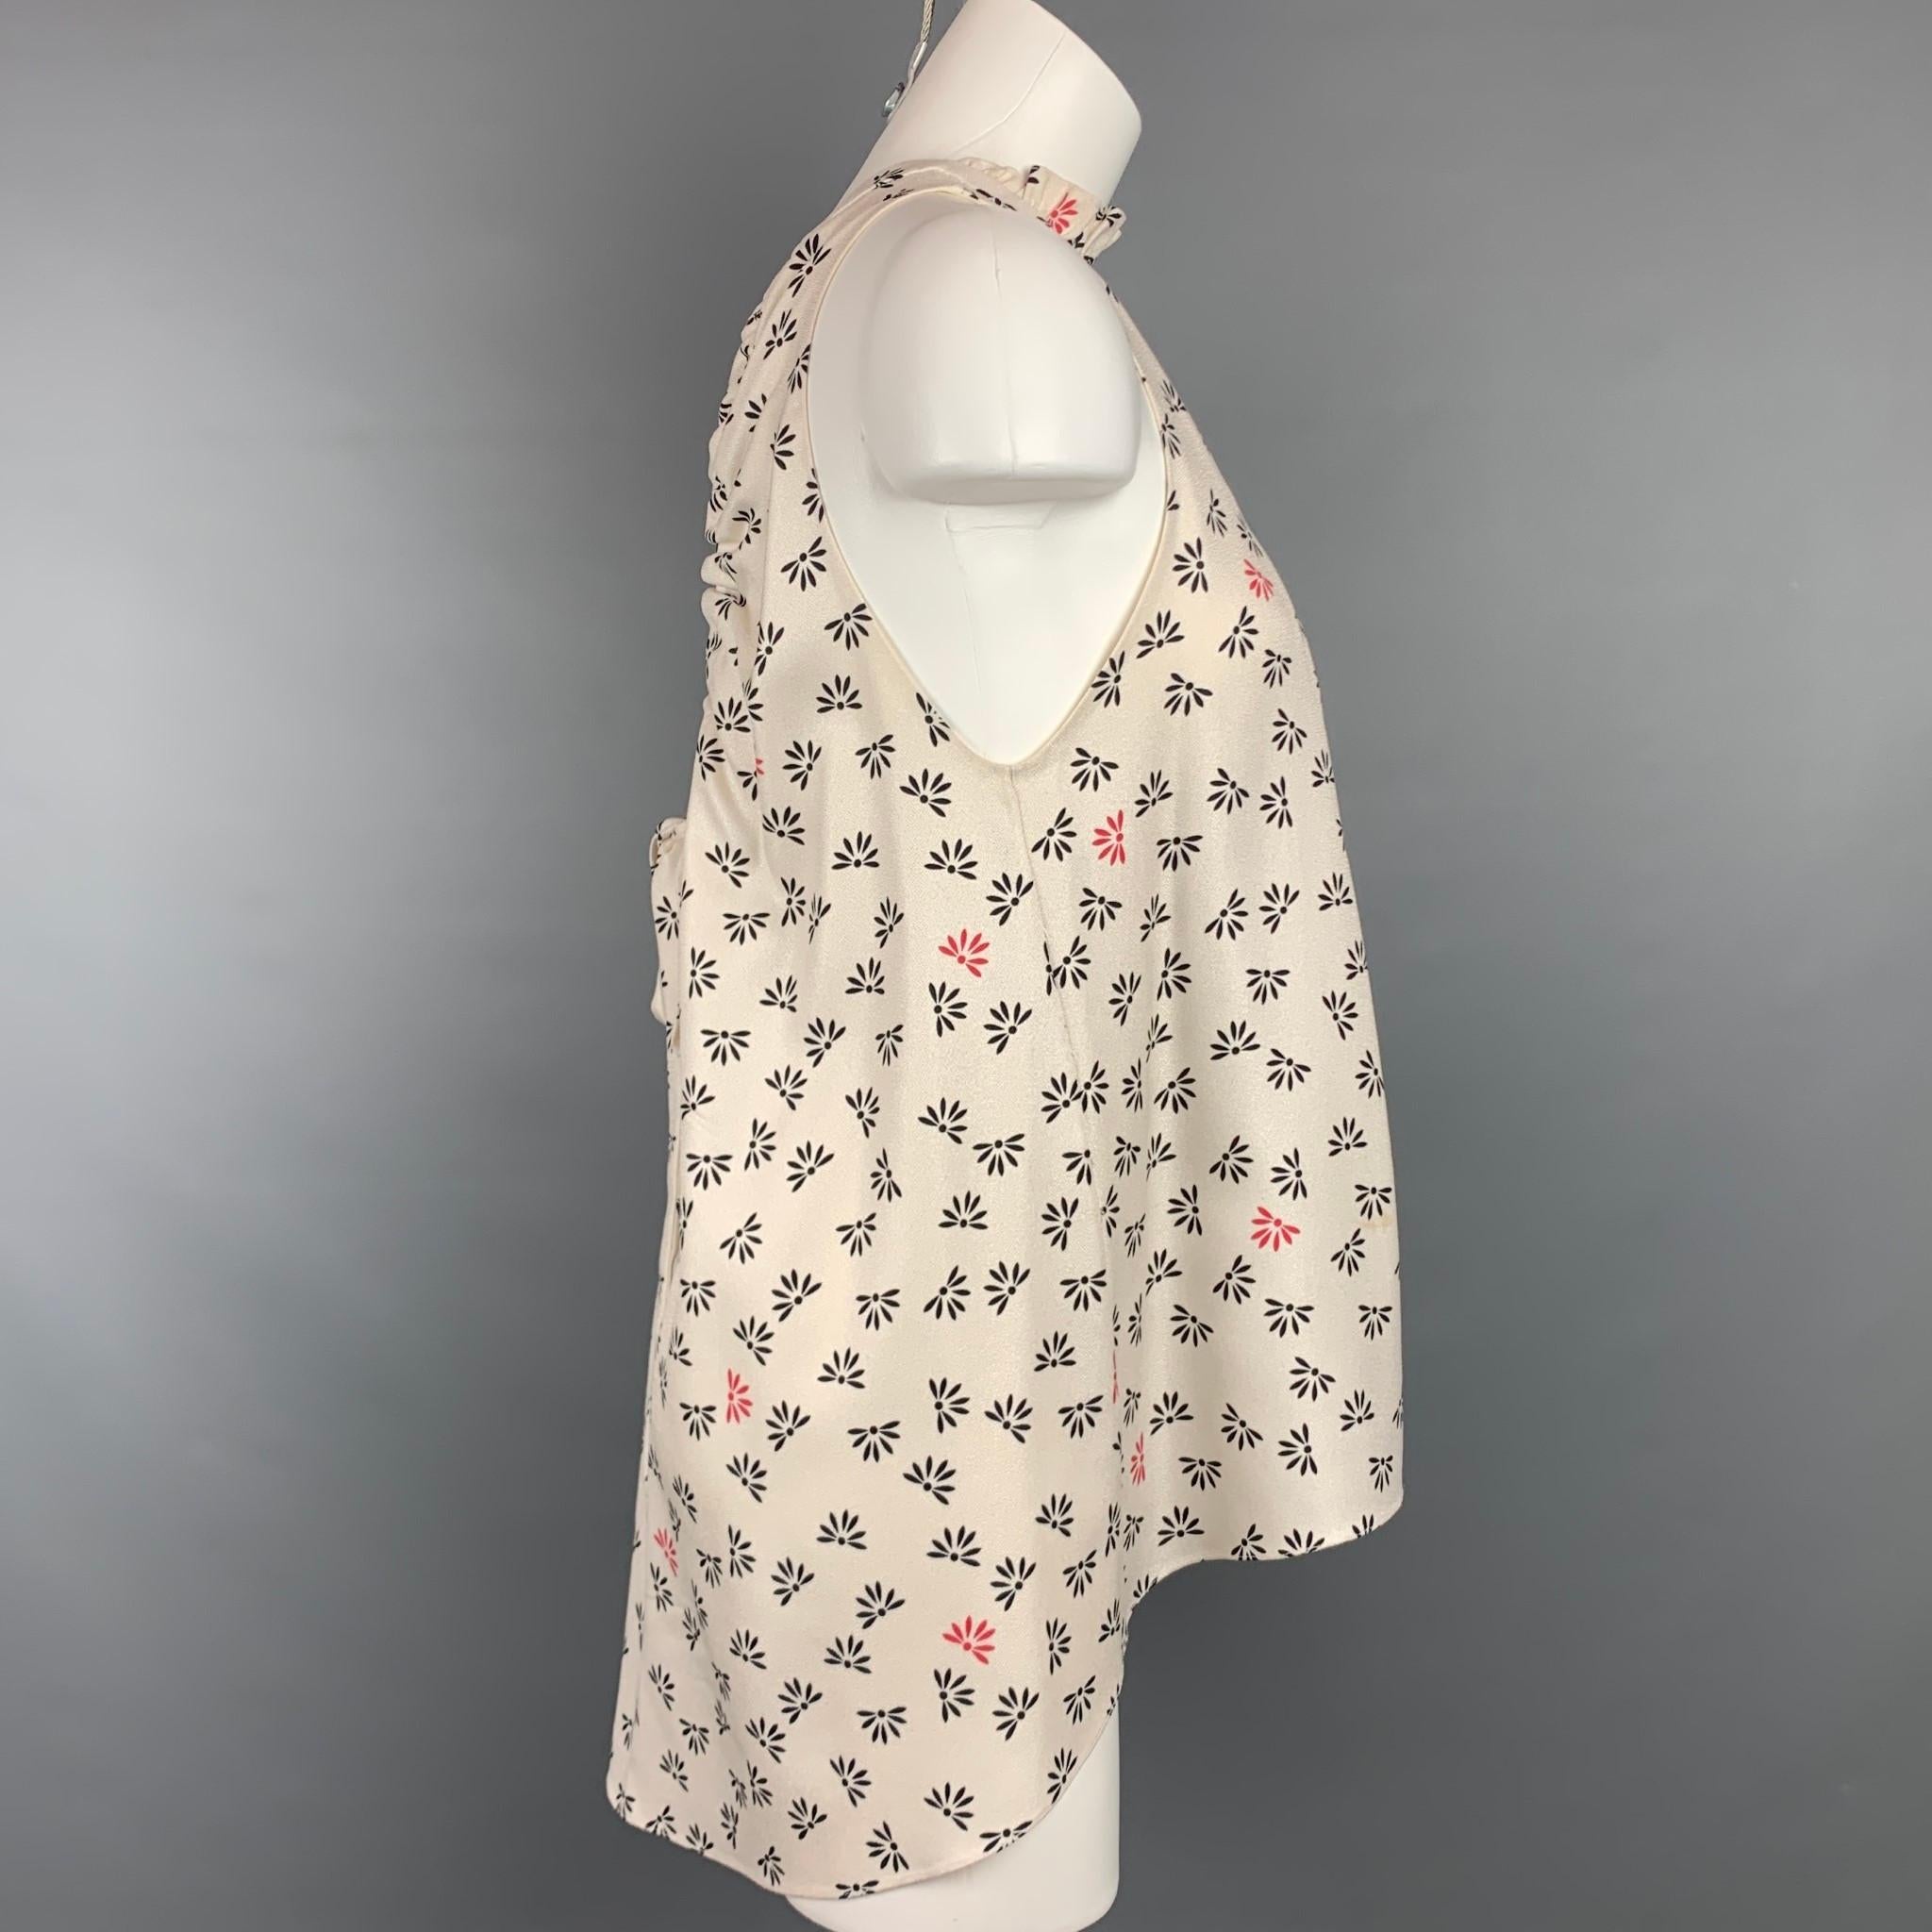 HELLESSY blouse comes in a cream & black crepe floral silk featuring a back tie detail, sleeveless, pleated, and a hook & loop closure. 

Very Good Pre-Owned Condition.
Marked: 2
Original Retail Price: $820.00

Measurements:

Bust: 38 in.
Length: